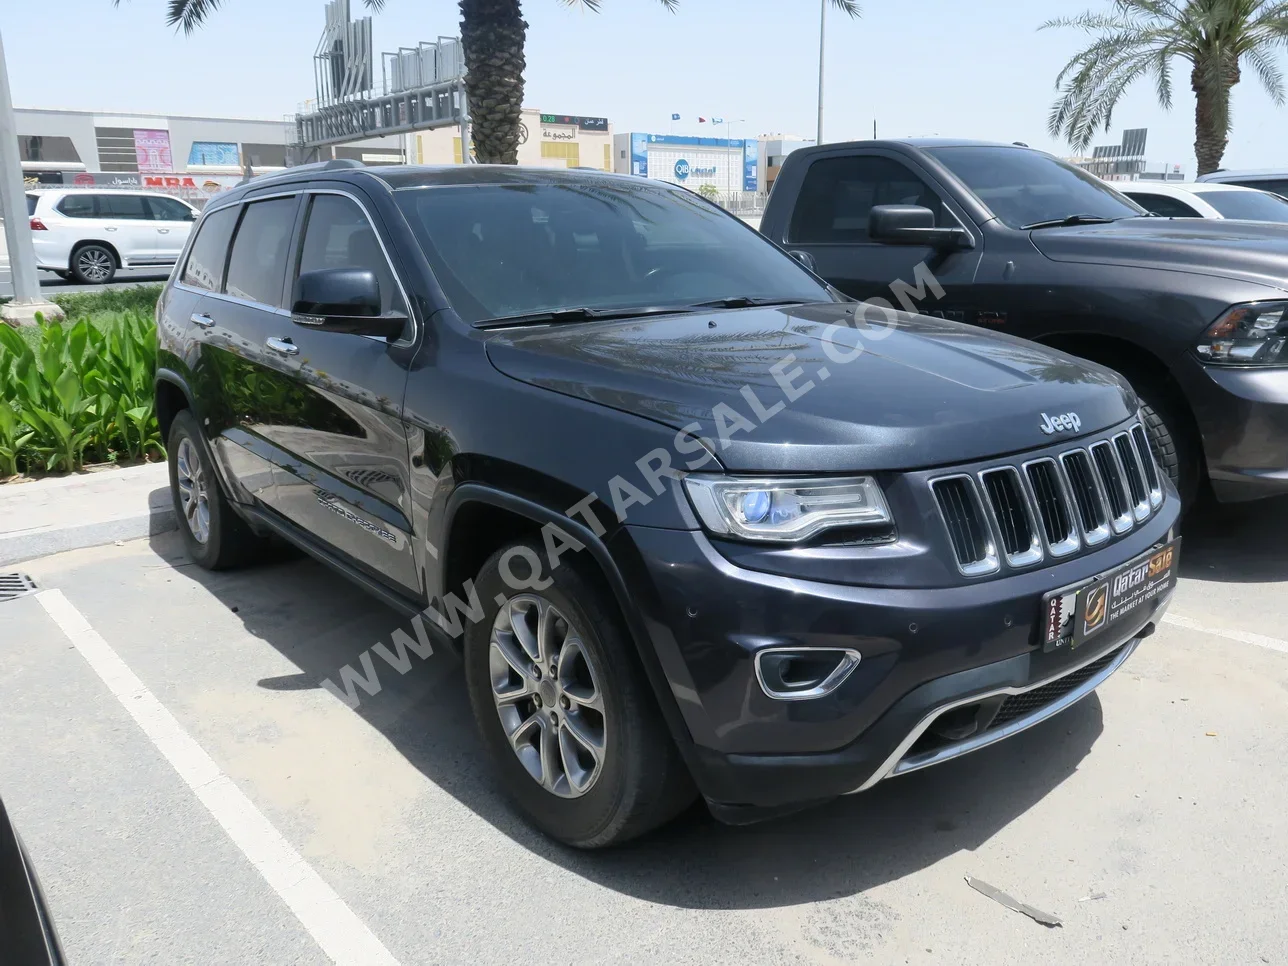 Jeep  Grand Cherokee  Limited  2014  Automatic  190,000 Km  8 Cylinder  Four Wheel Drive (4WD)  SUV  Black